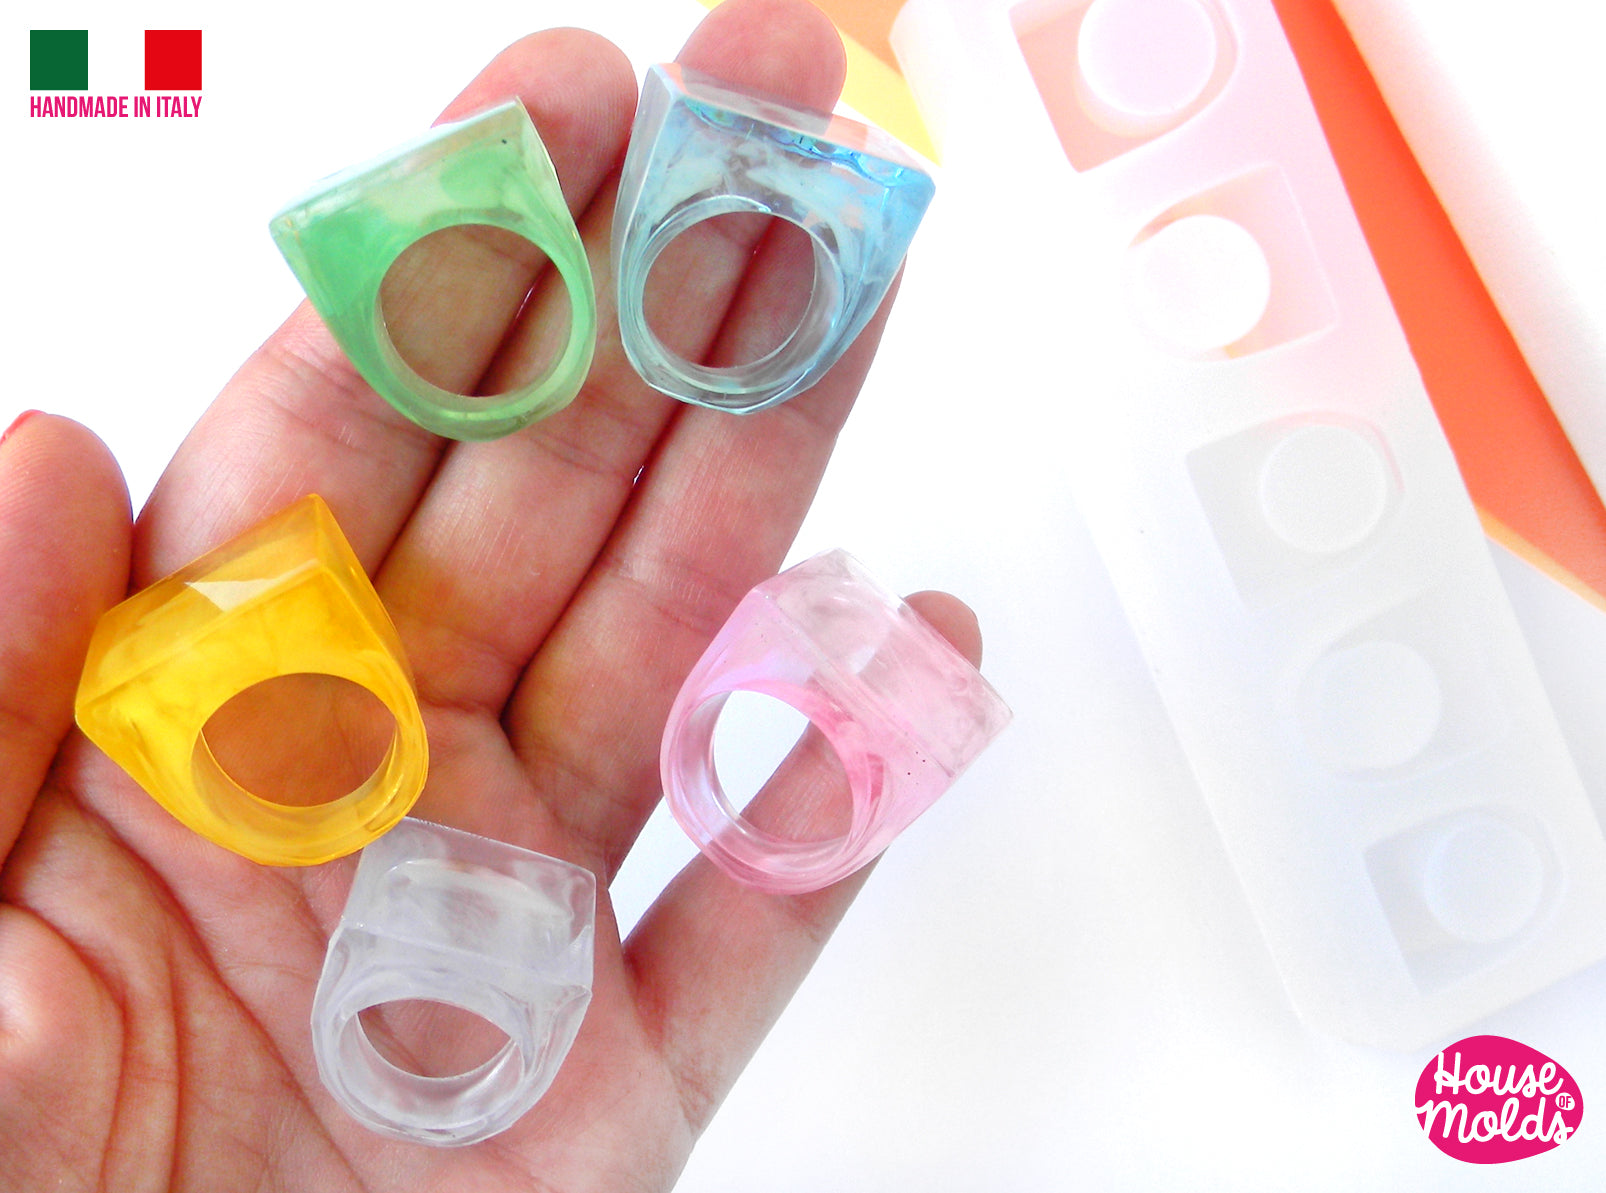 Silicone bracelets mold, 8 pieces - Graffiti Resin Shop for Resin and  Silicone Material Supply